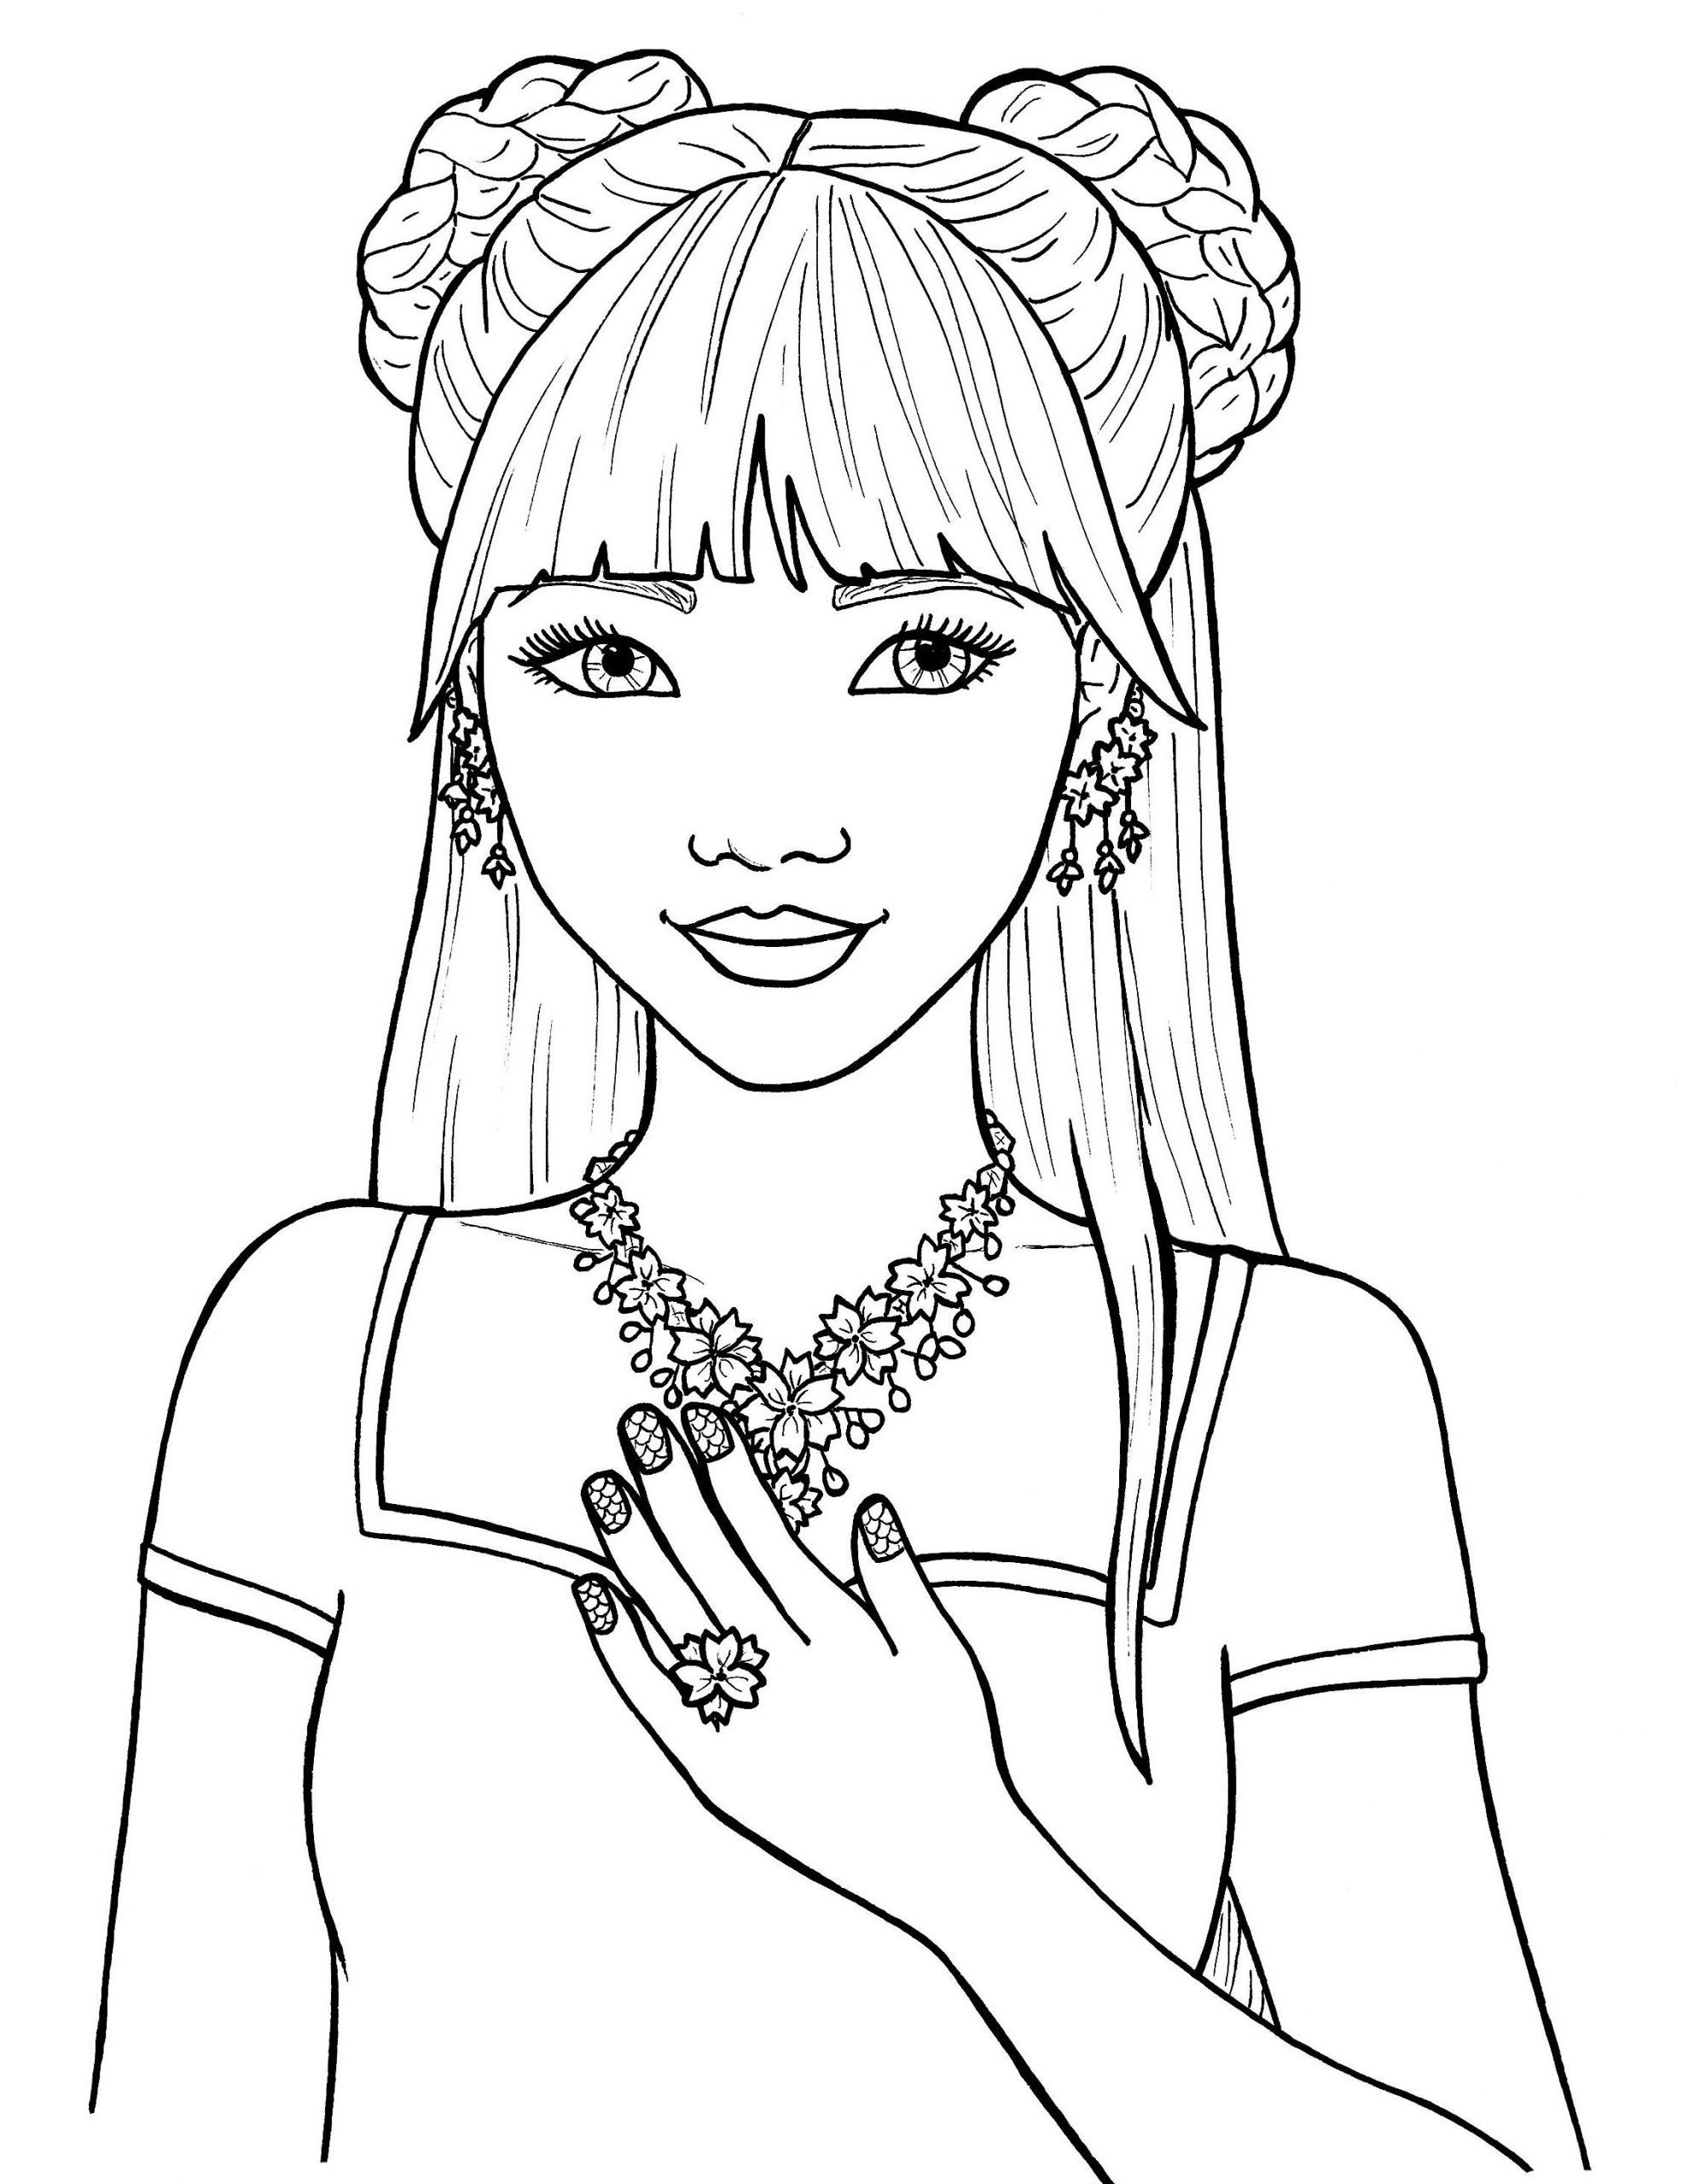 Free Coloring Sheets For Girls
 Pretty Girls Coloring Pages Free